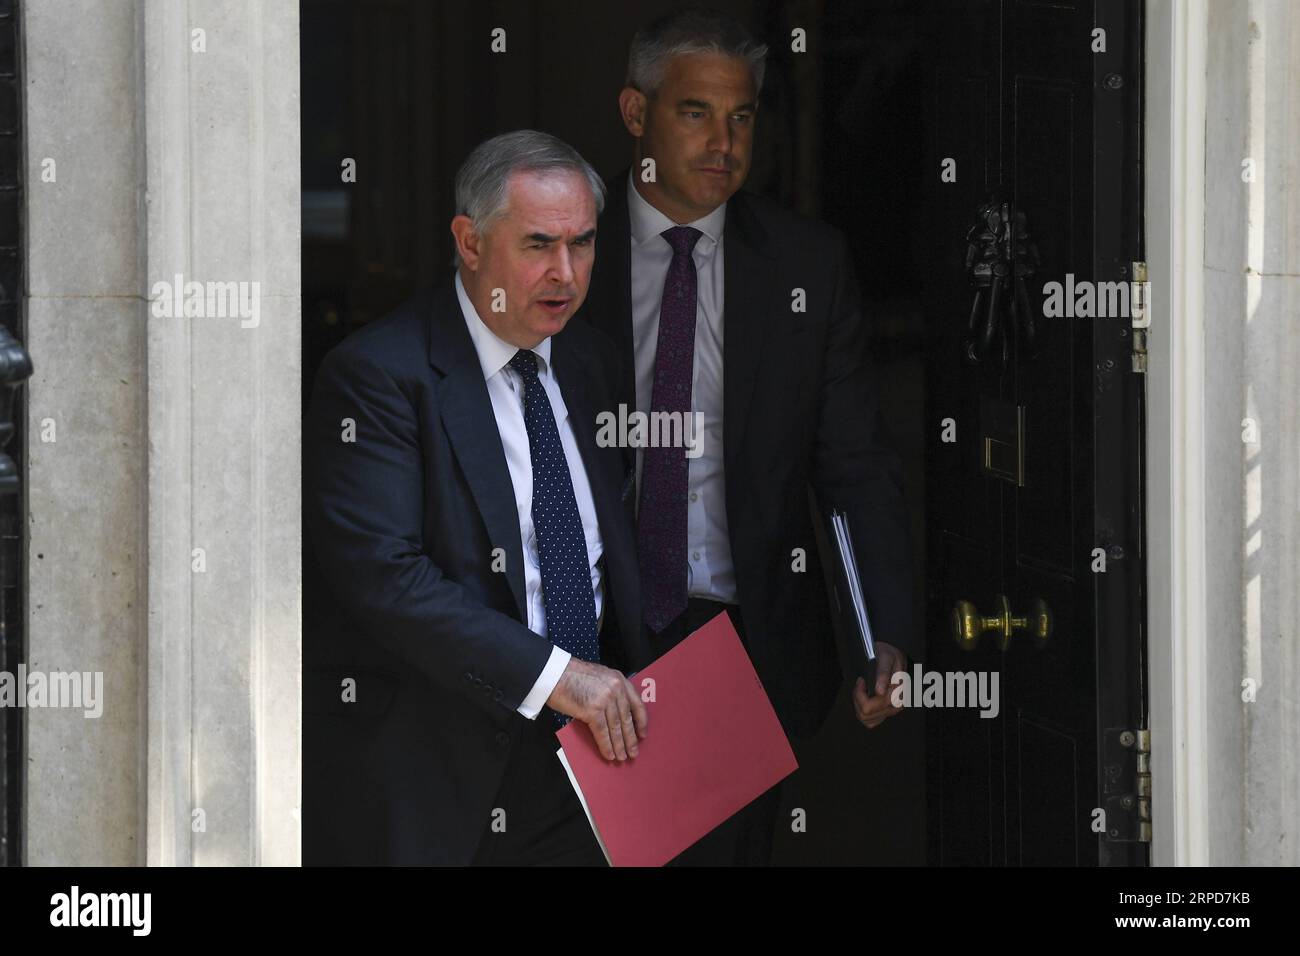 (190725) -- LONDON, July 25, 2019 (Xinhua) -- Britain s Attorney General Geoffrey Cox (L) and Brexit Secretary Stephen Barclay leave 10 Downing Street after attending a cabinet meeting in London, Britain, on July 25, 2019. (Photo by Alberto Pezzali/Xinhua) BRITAIN-LONDON-CABINET MEETING PUBLICATIONxNOTxINxCHN Stock Photo